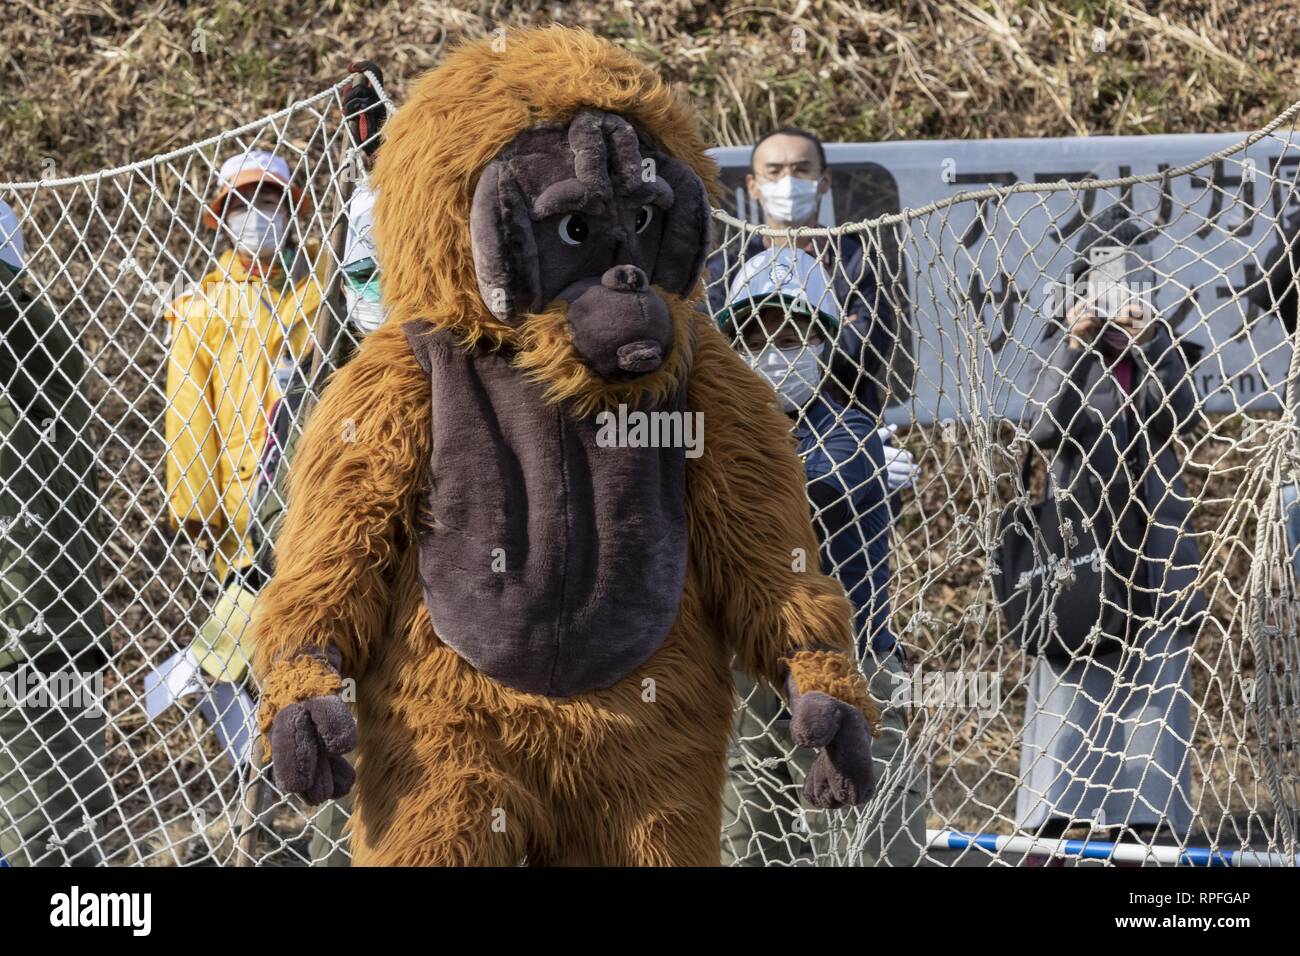 Tokyo, Japan. 22nd Feb, 2019. A zookeeper wearing orangutan costume tries  to escape while zookeepers hold up a net in an attempt to capture it during  an Escaped Animal Drill at Tama